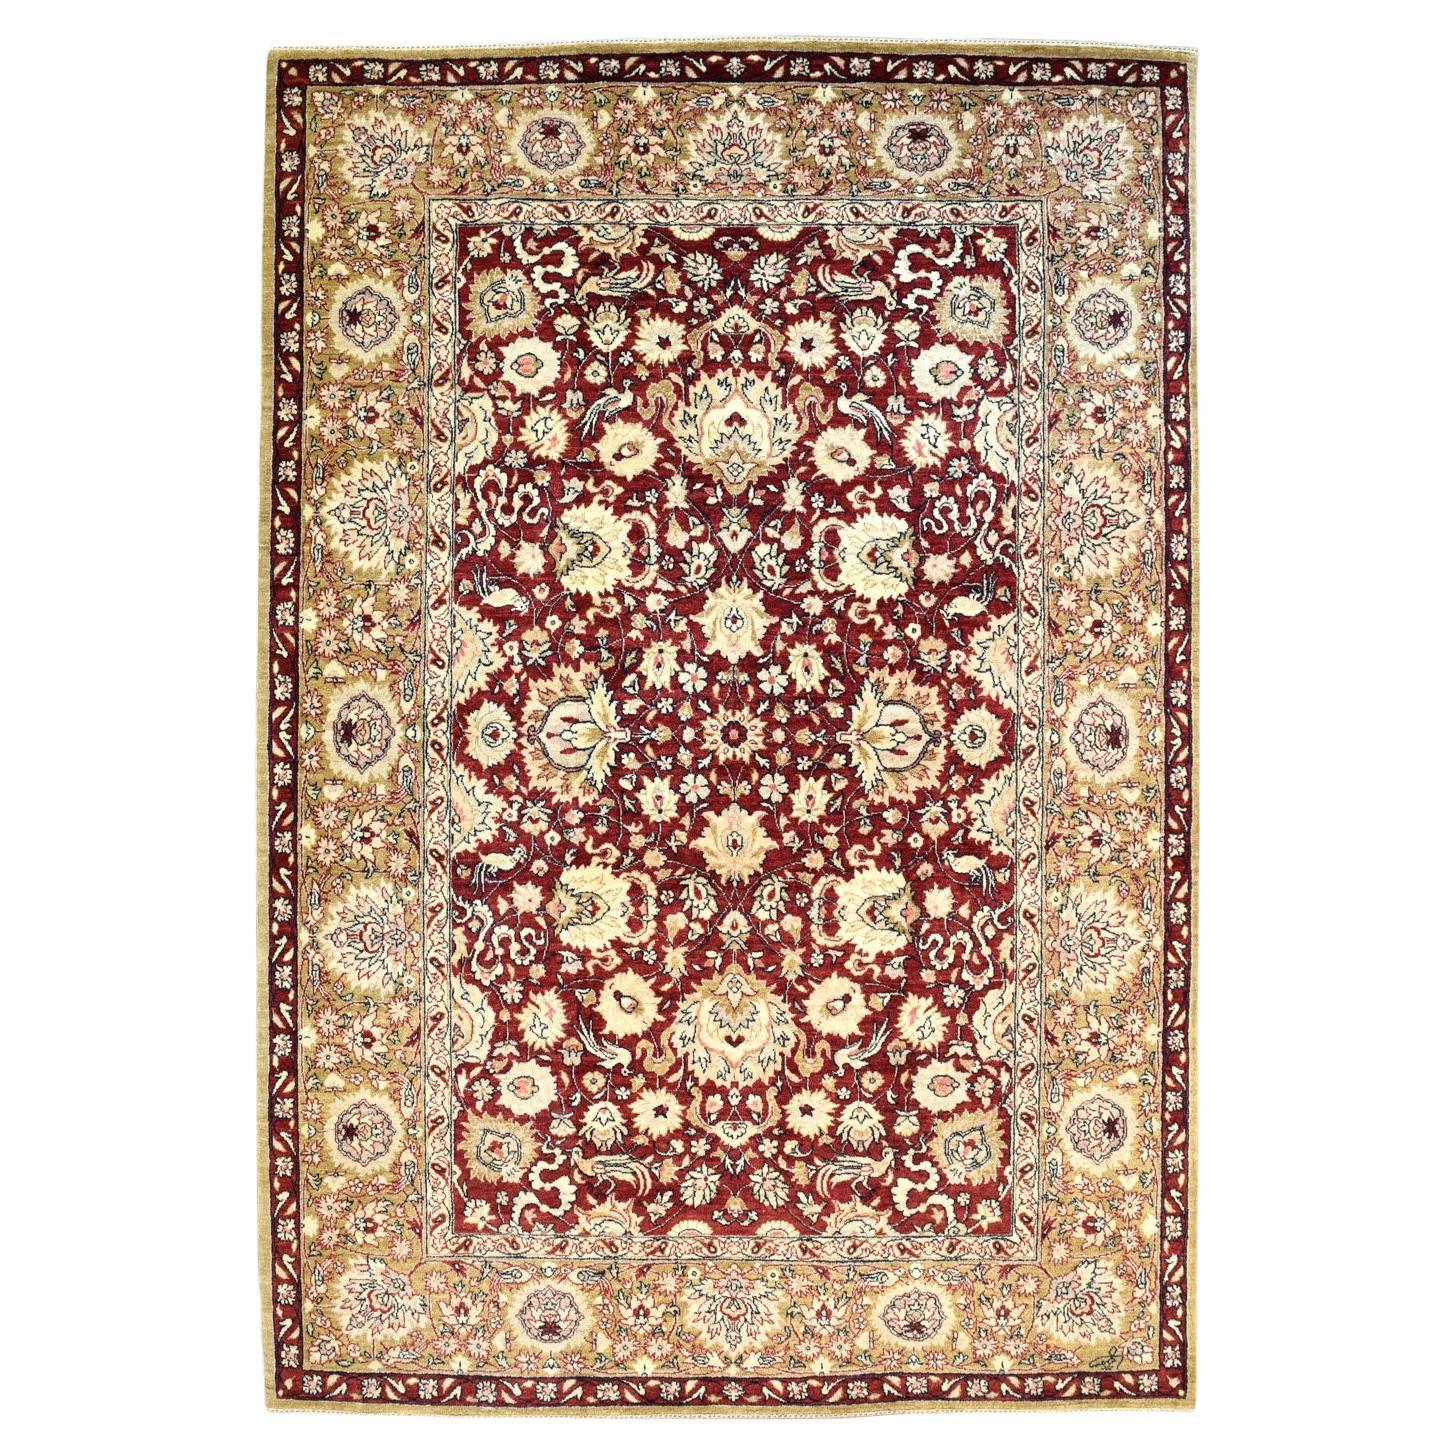 Traditional Mohtasham Persian Area Rug, Pure Wool, Red, Gold, and Cream, 5' x 7' For Sale